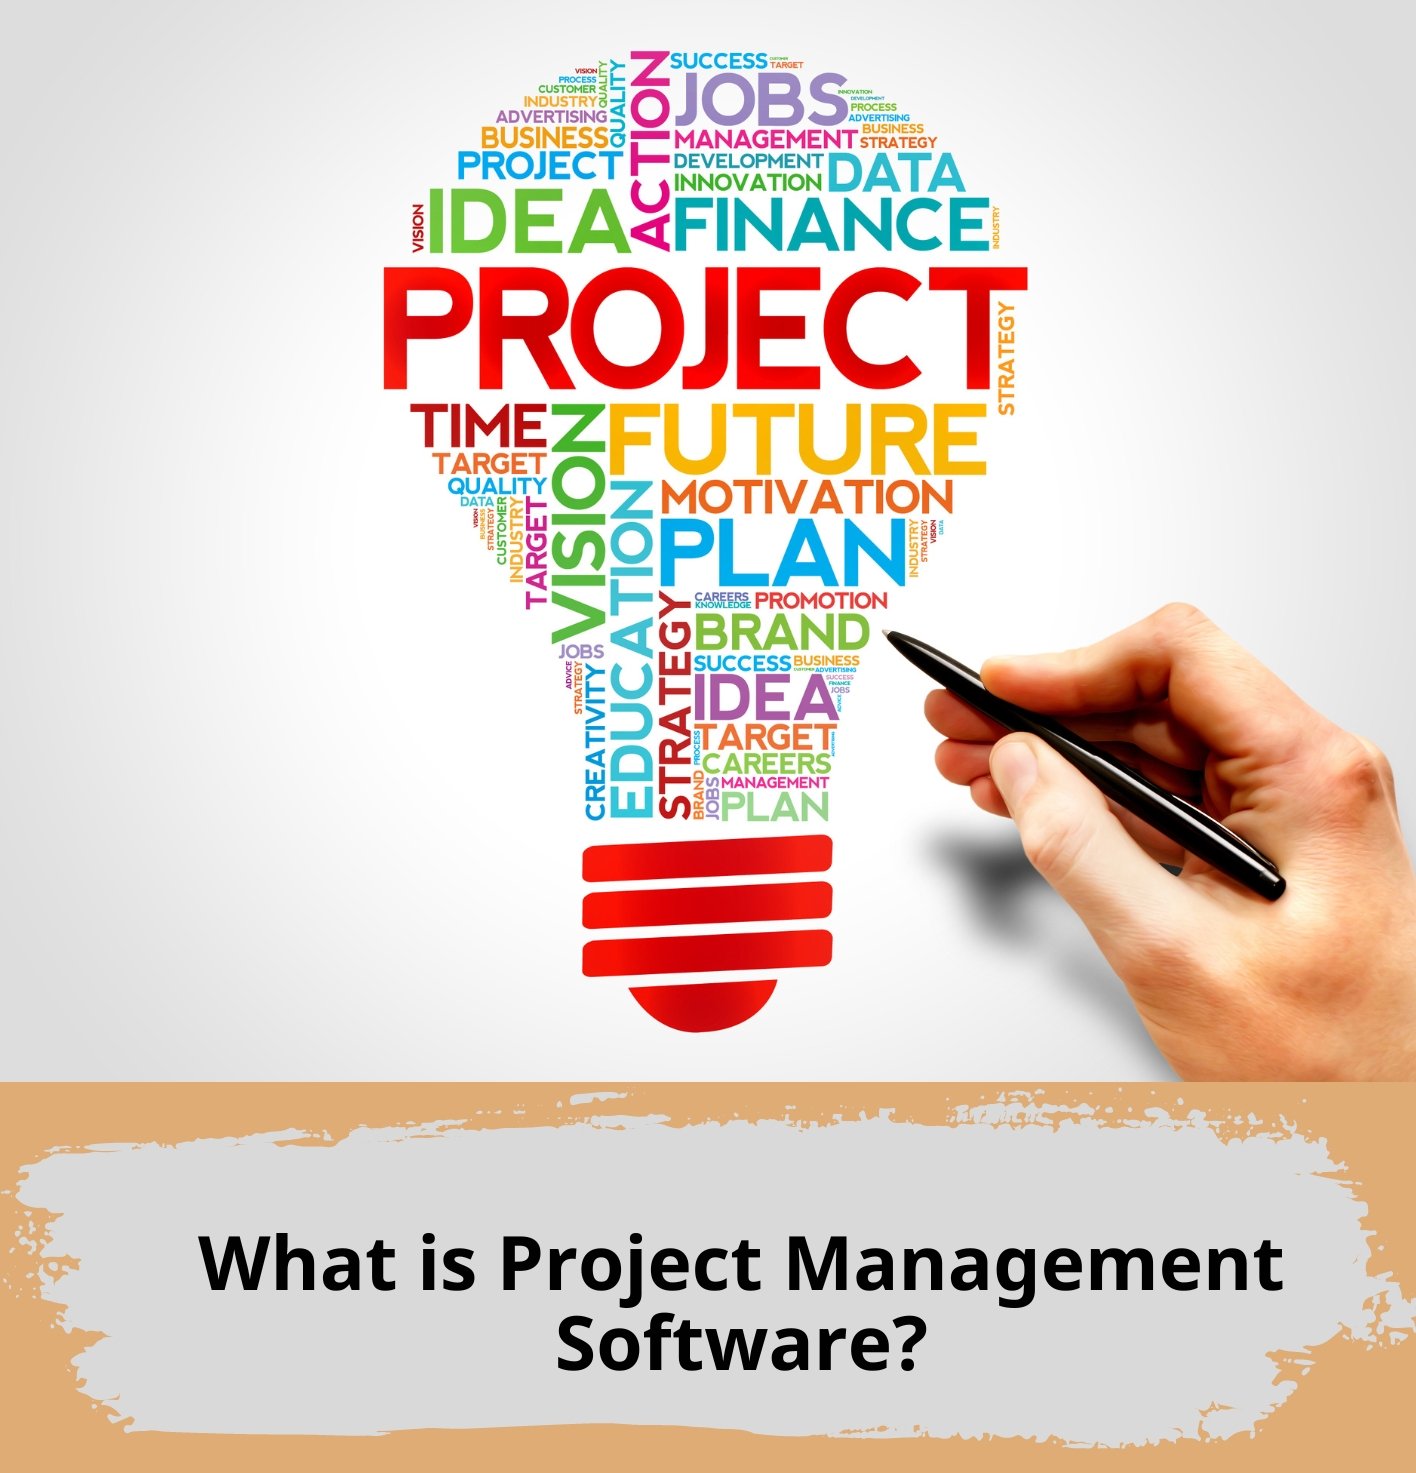 What is Project Management Software?